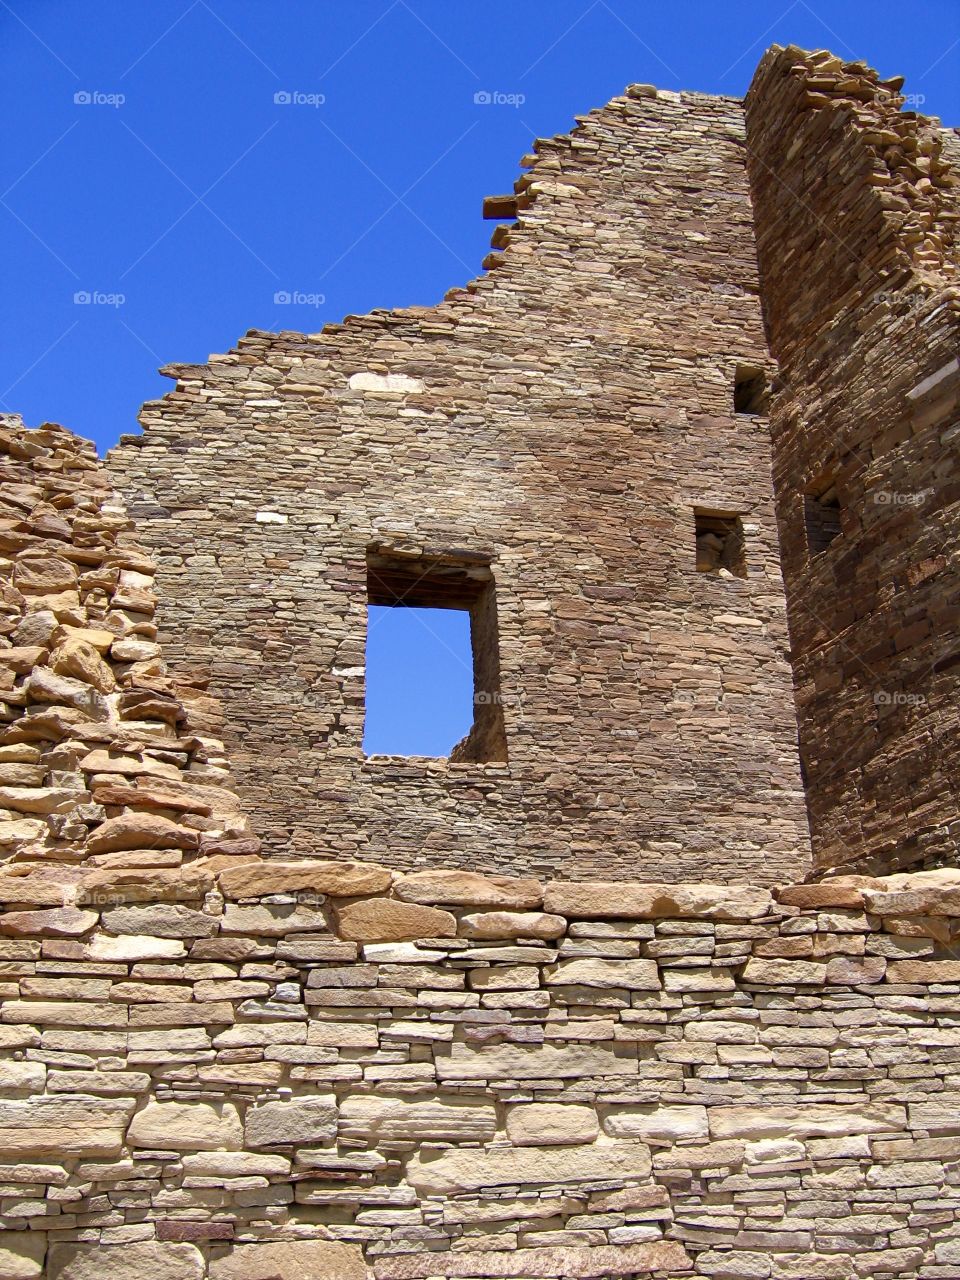 Window in the ruins at Chaco Culture National Historical Park, New Mexico